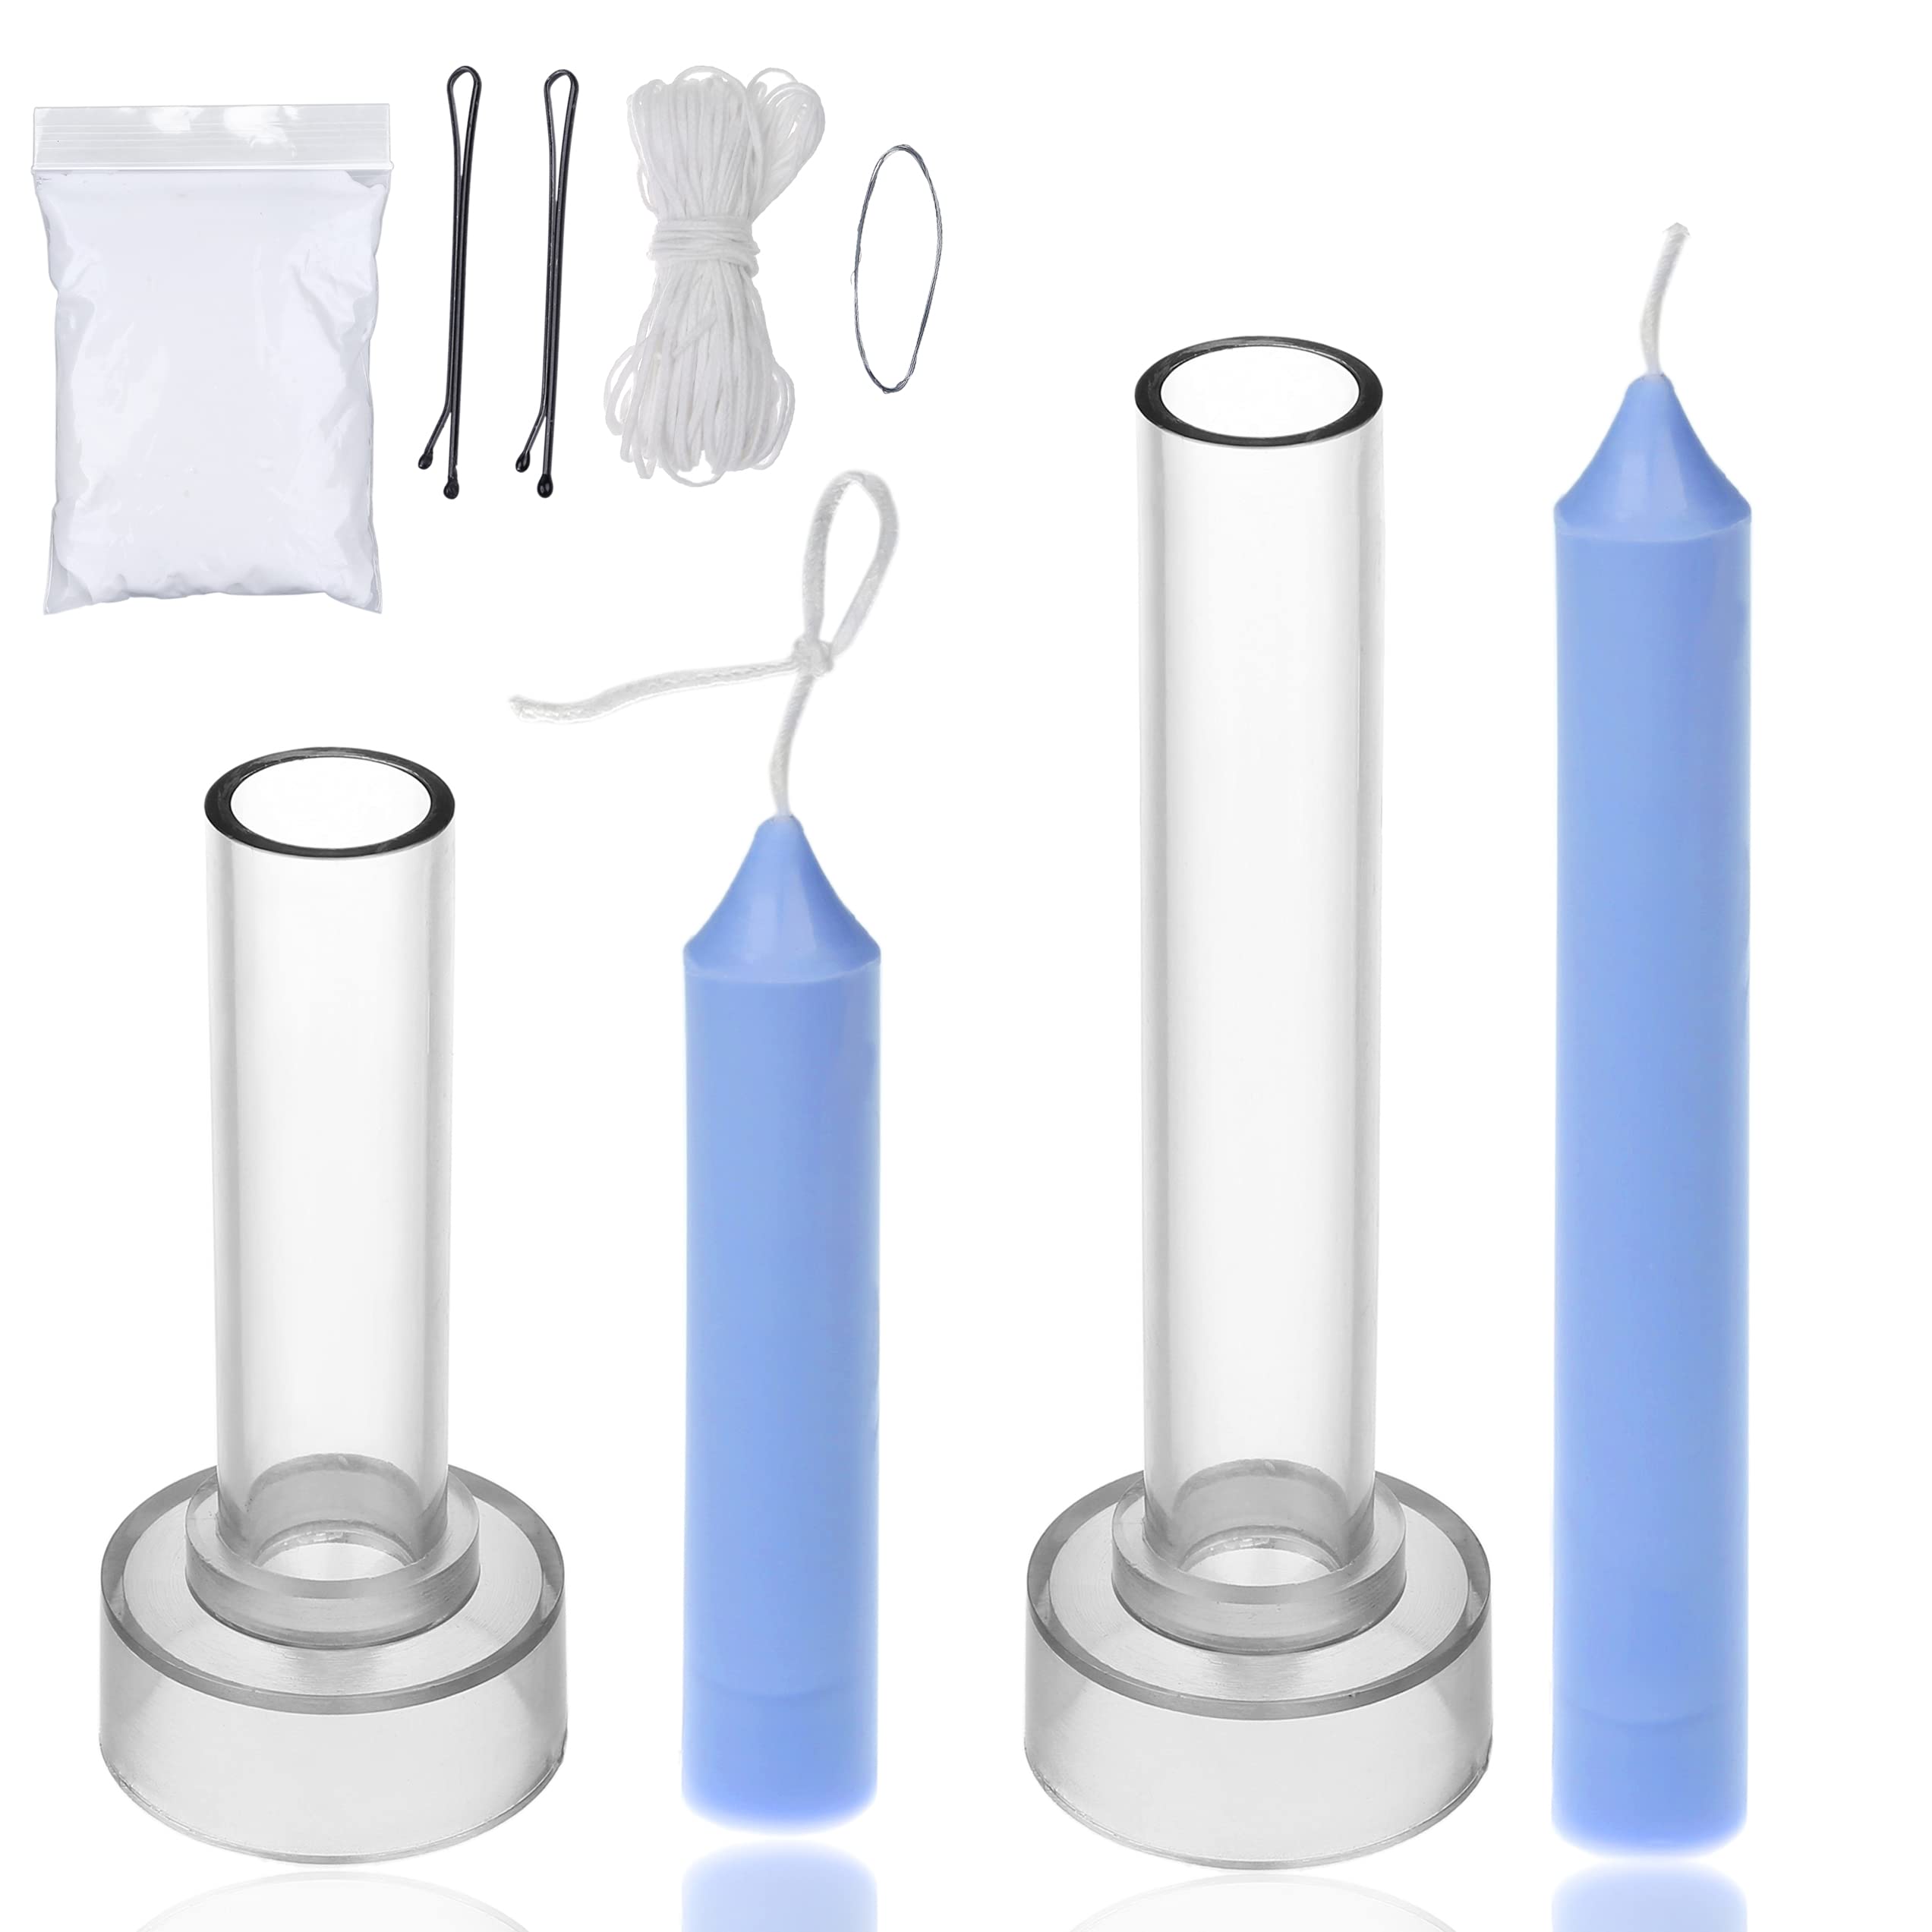 Taper Candle Mold Set-2PC Pillar Candle Molds -Perfect for Making Emergency  Candles, Chime Candles, Table Candles-30 Ft. of Wick , A Mold Sealer and 2  Candle Wick Clips Included as a Gift.